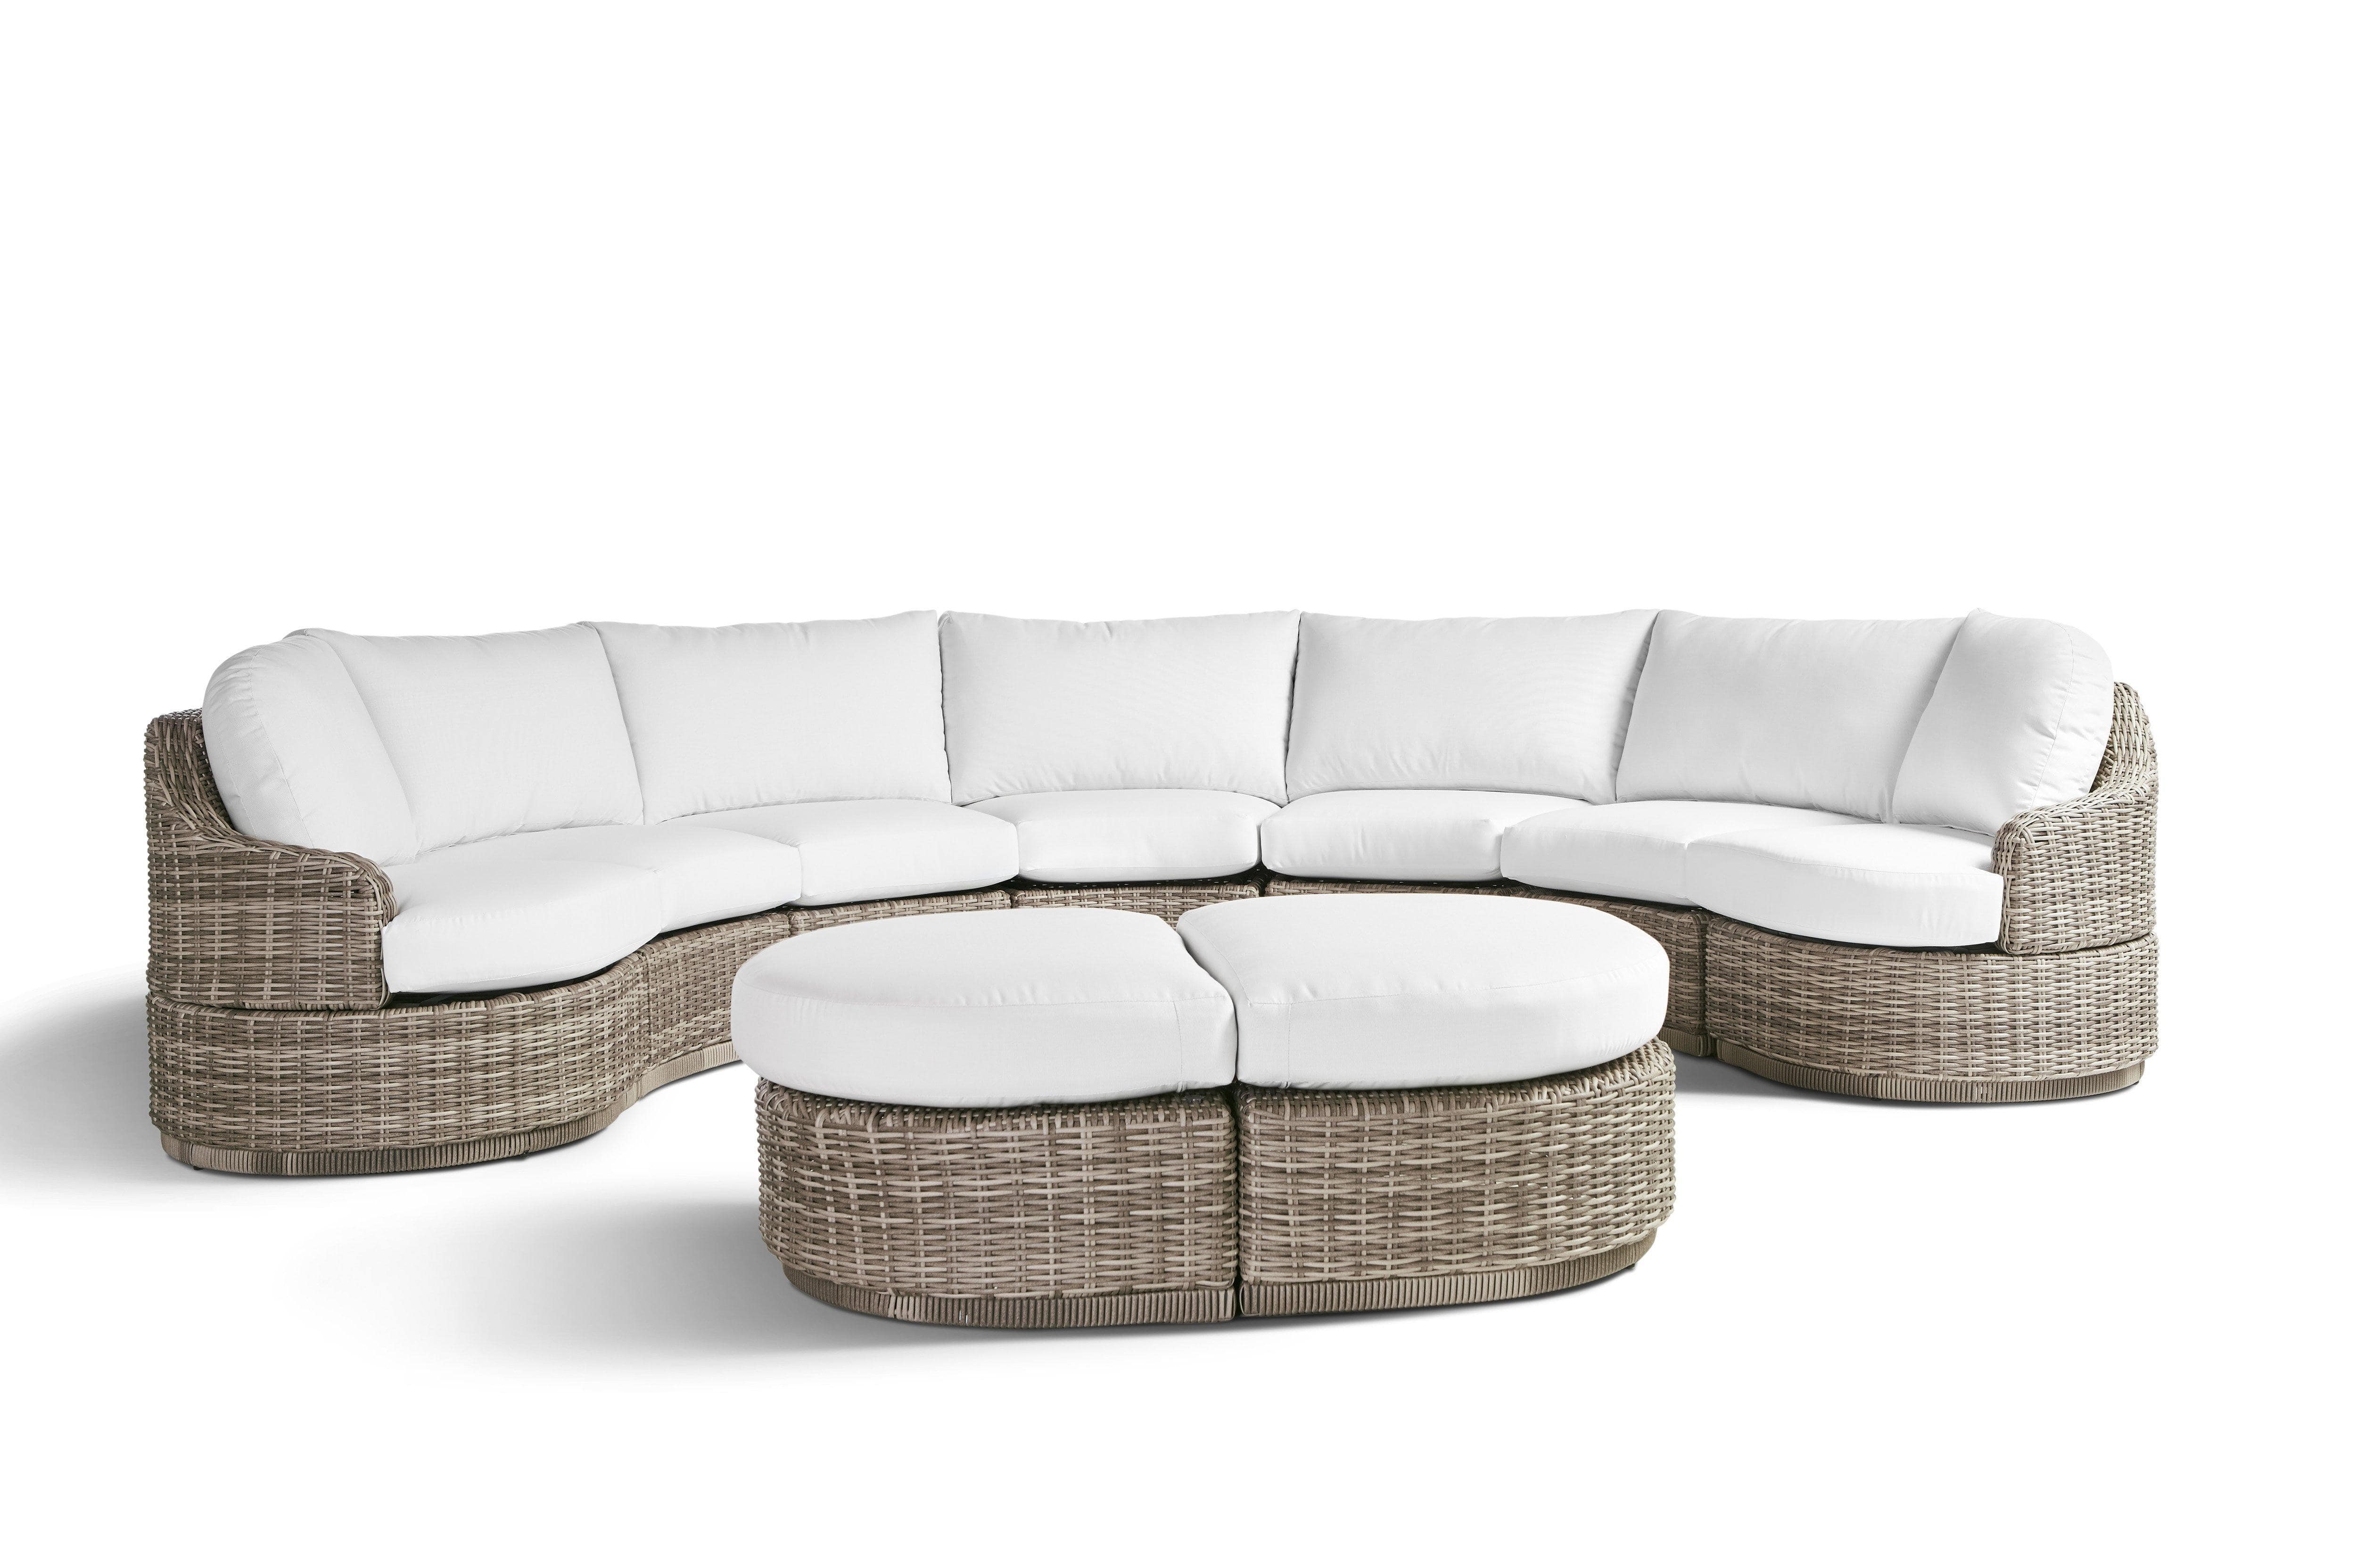 South Sea Outdoor Living Patio Furniture Luna Cove Half Round Ottoman by South Sea Outdoor Living - 74306